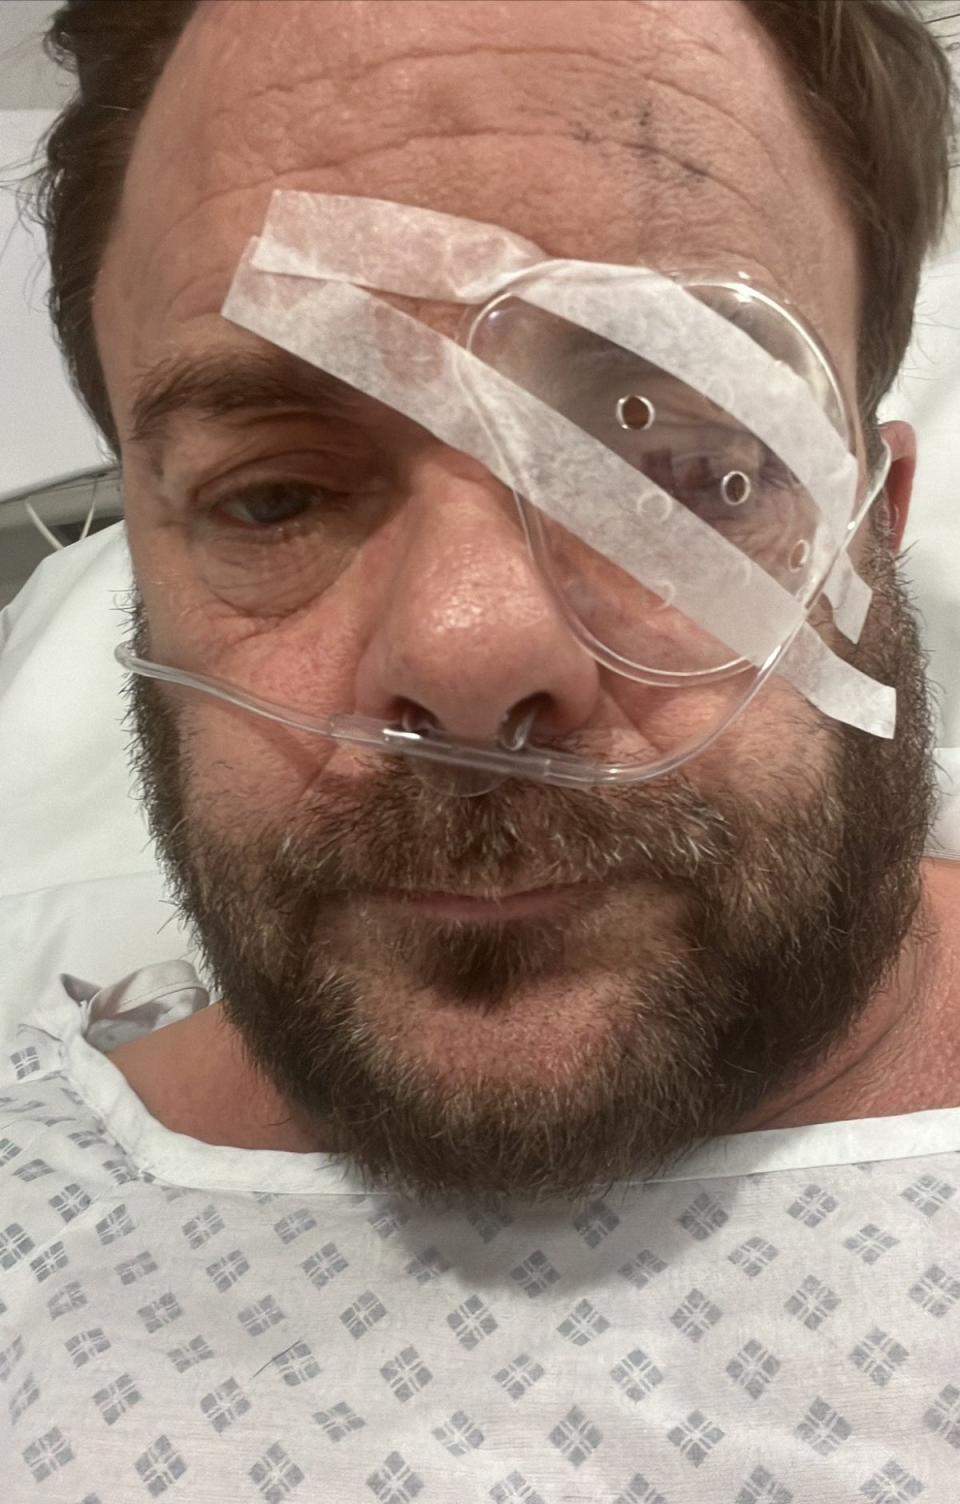 Spencer had his left eye “bolted” after the attack in Surbiton (Specner Gymer)